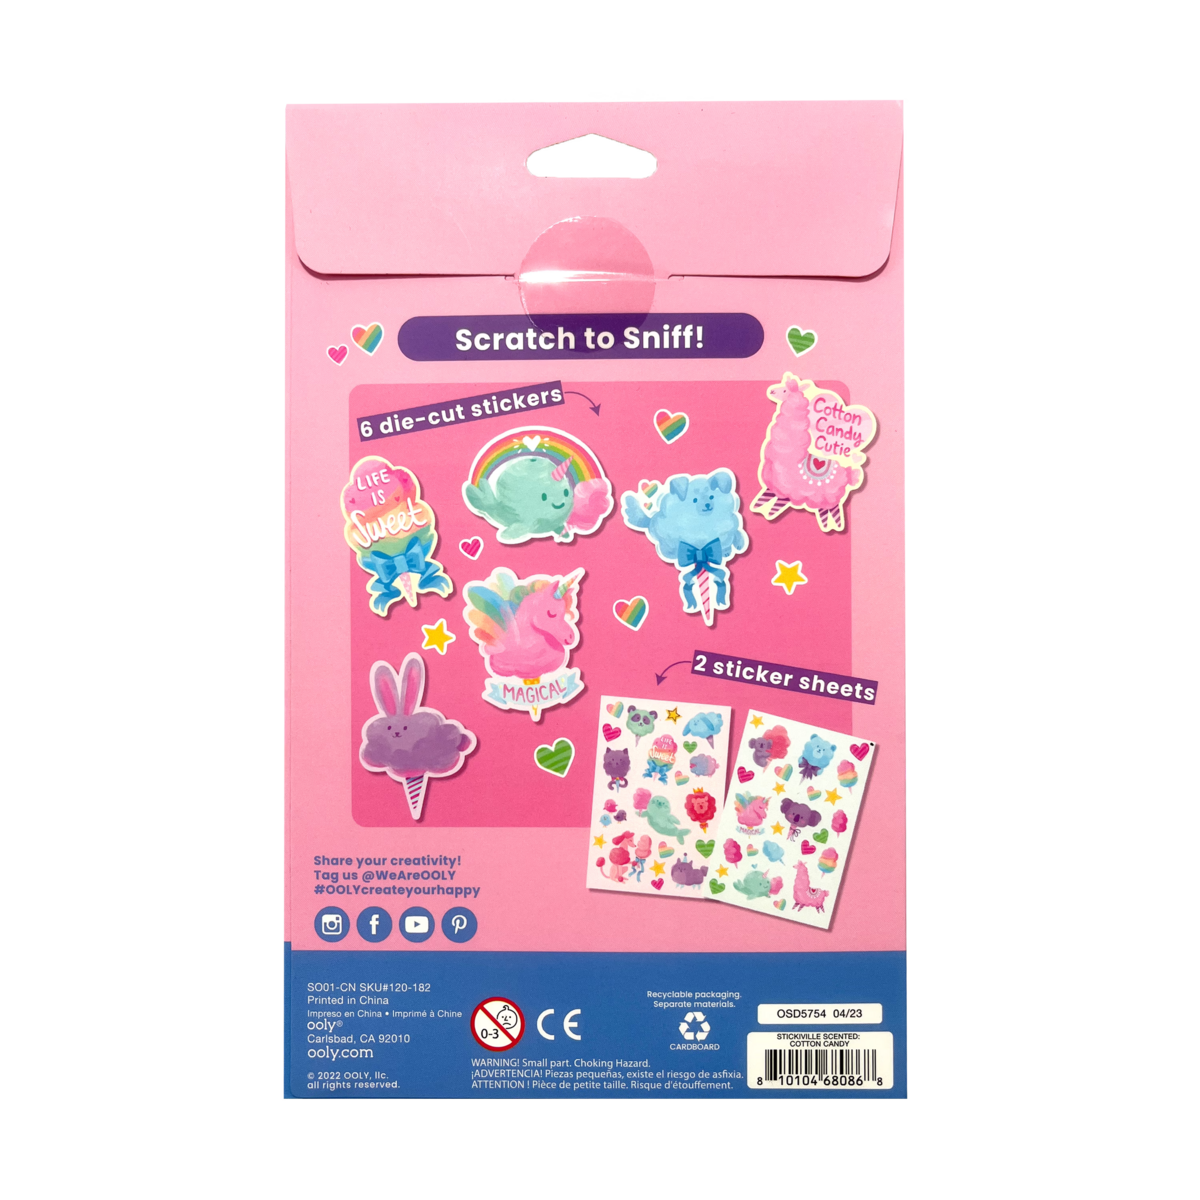 Stickiville Cotton Candy scented stickers back of packaging